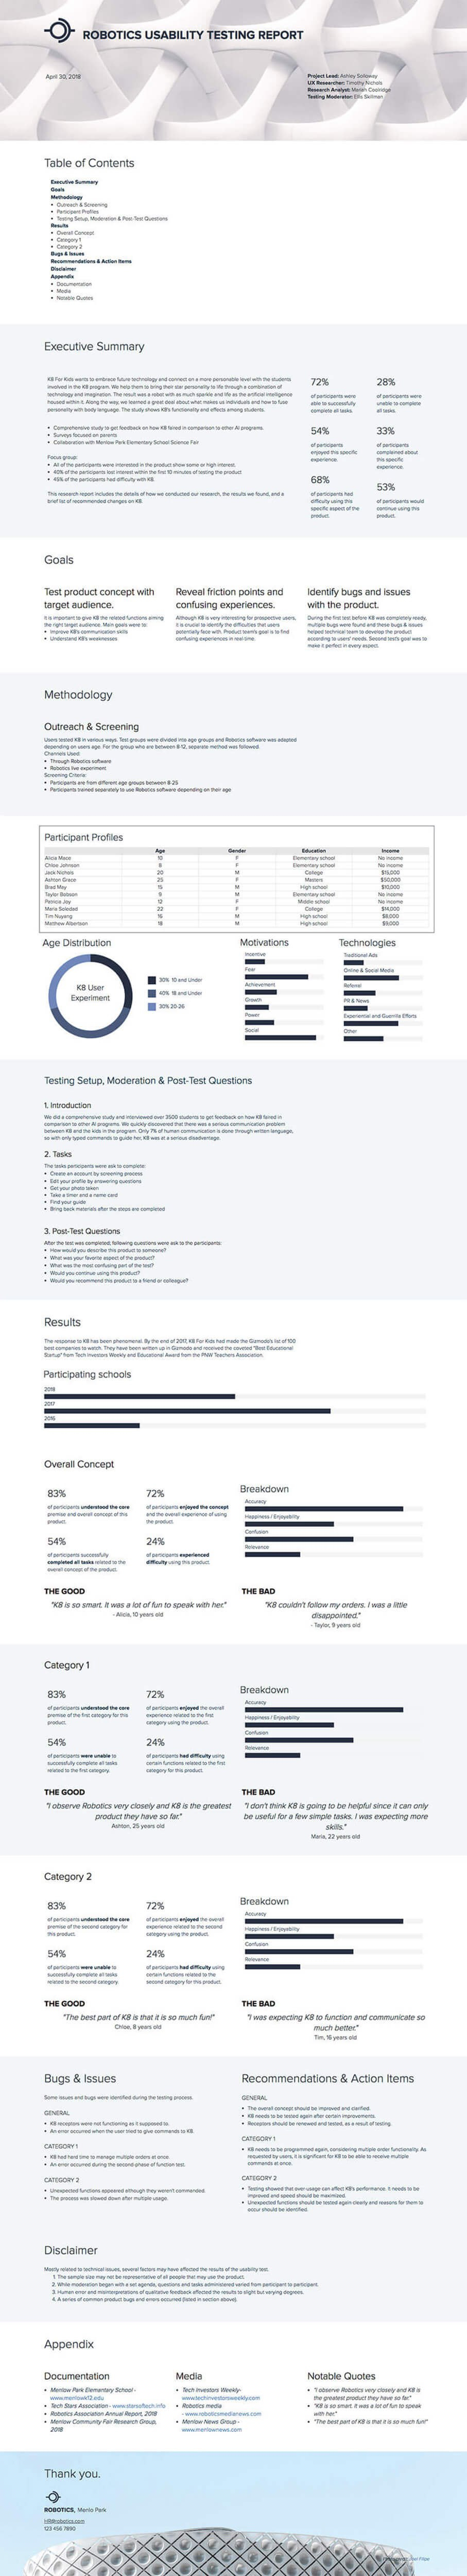 How To Write A Usability Testing Report With Samples  Xtensio pertaining to Ux Report Template